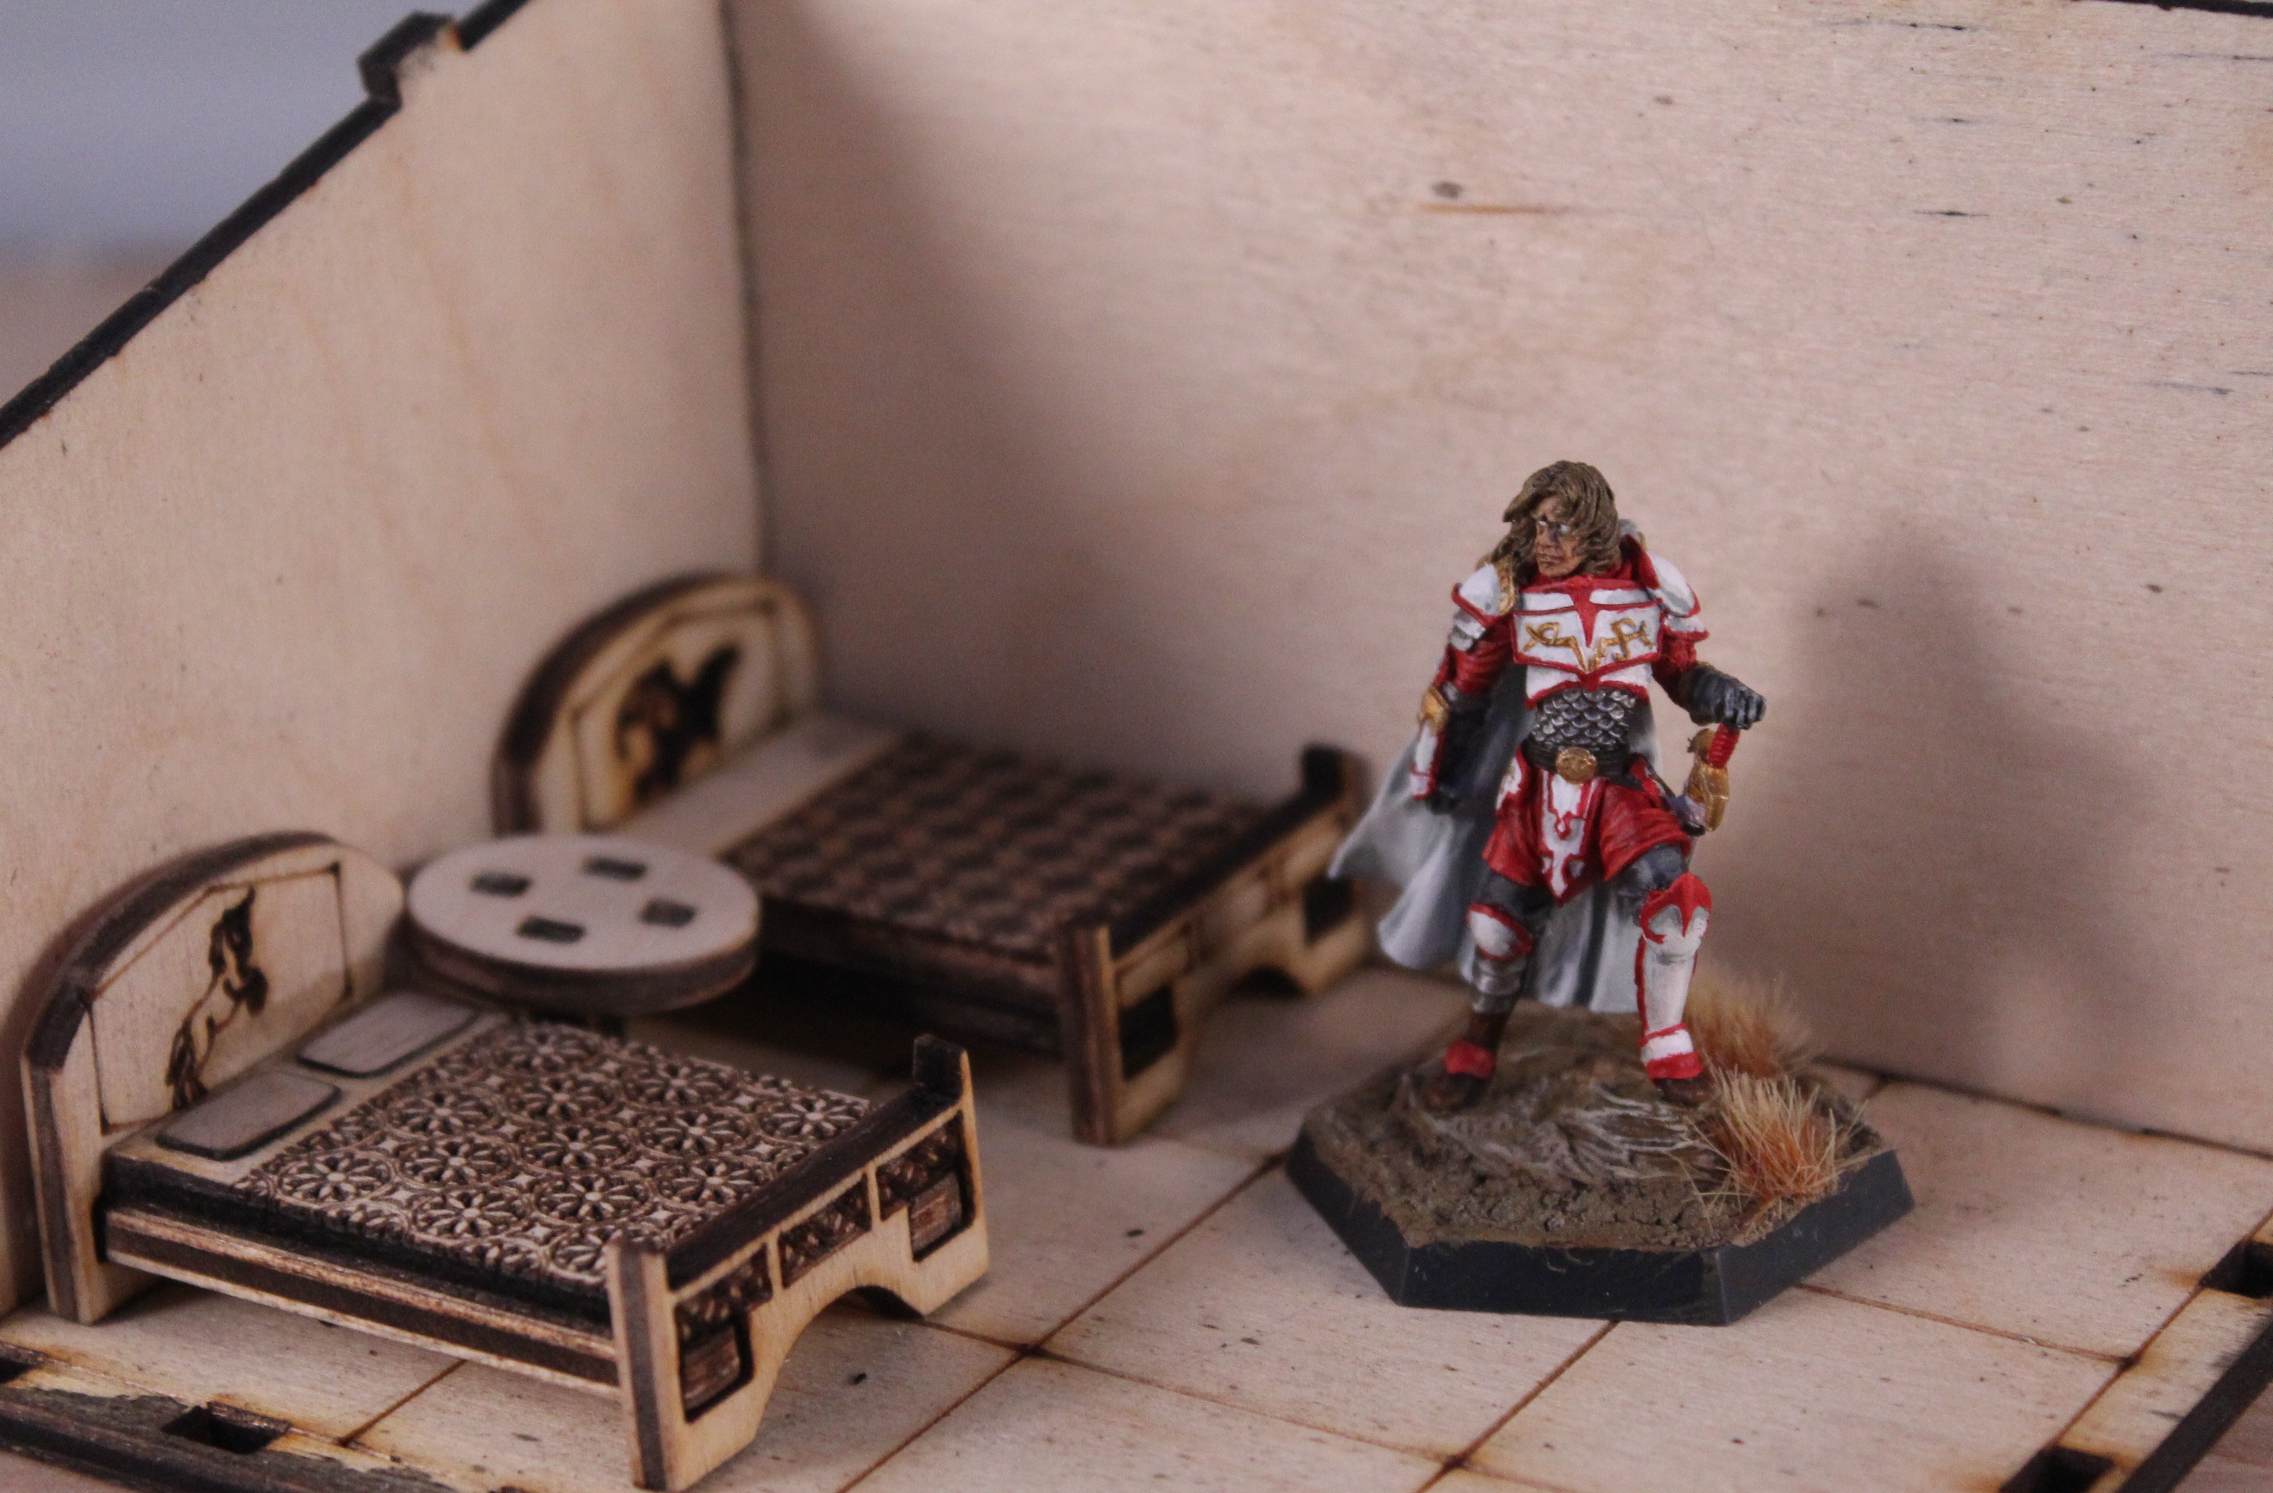 One miniature figurine shown in the interior of the house with beds and nightstands placed on their one inch squares.